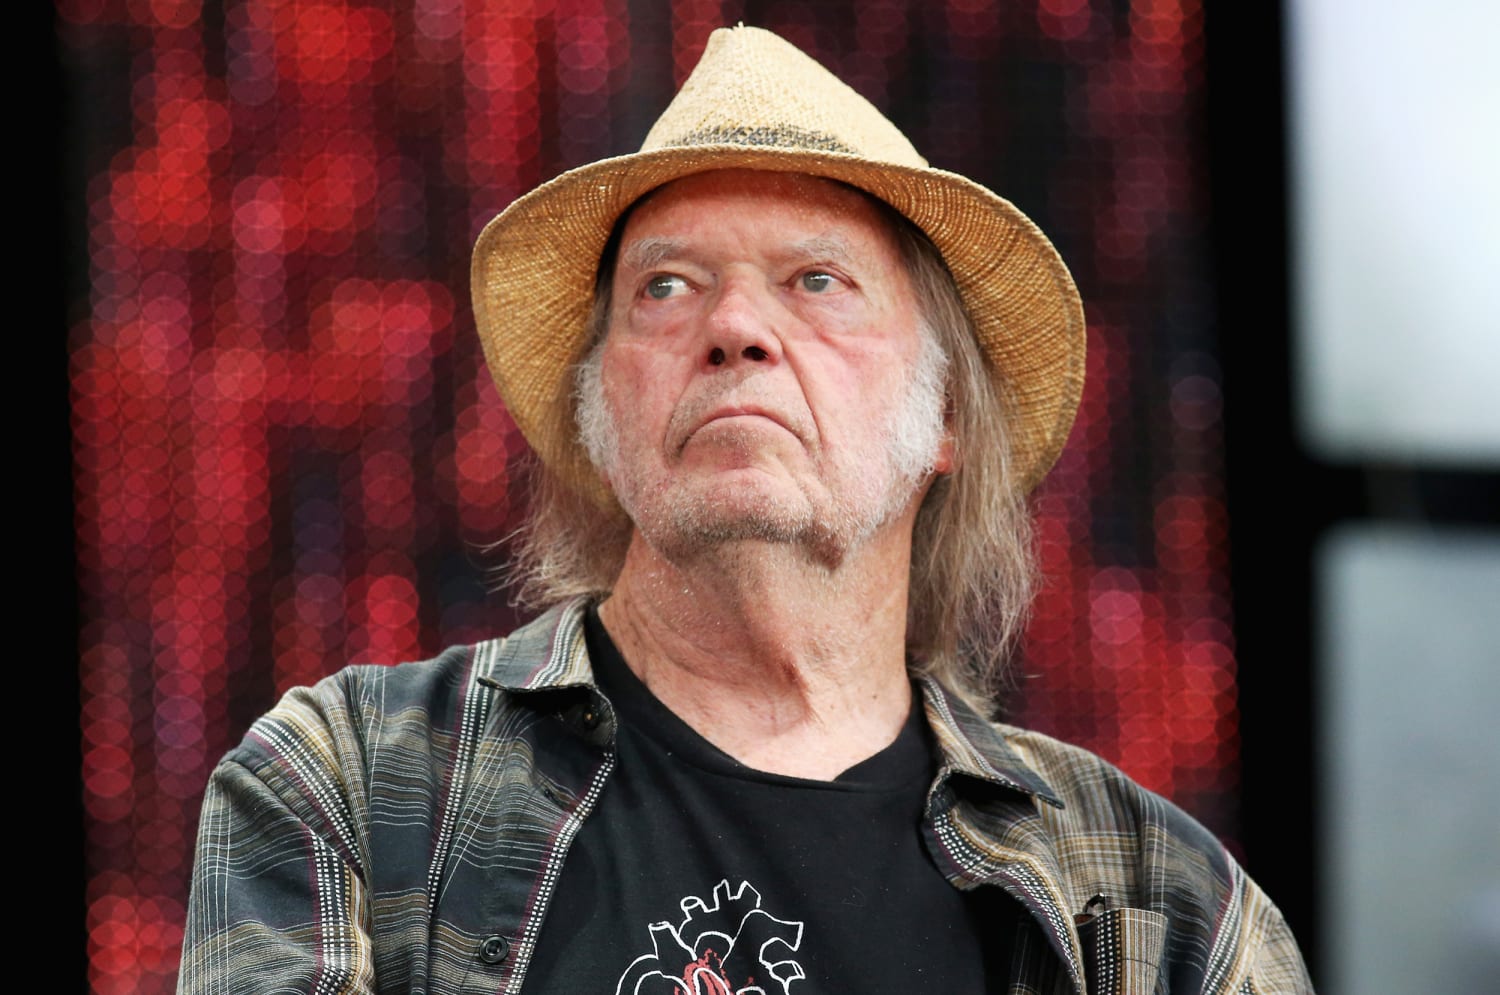 Neil Young says he will return to Spotify, two years after his exit from Joe Rogan's podcast